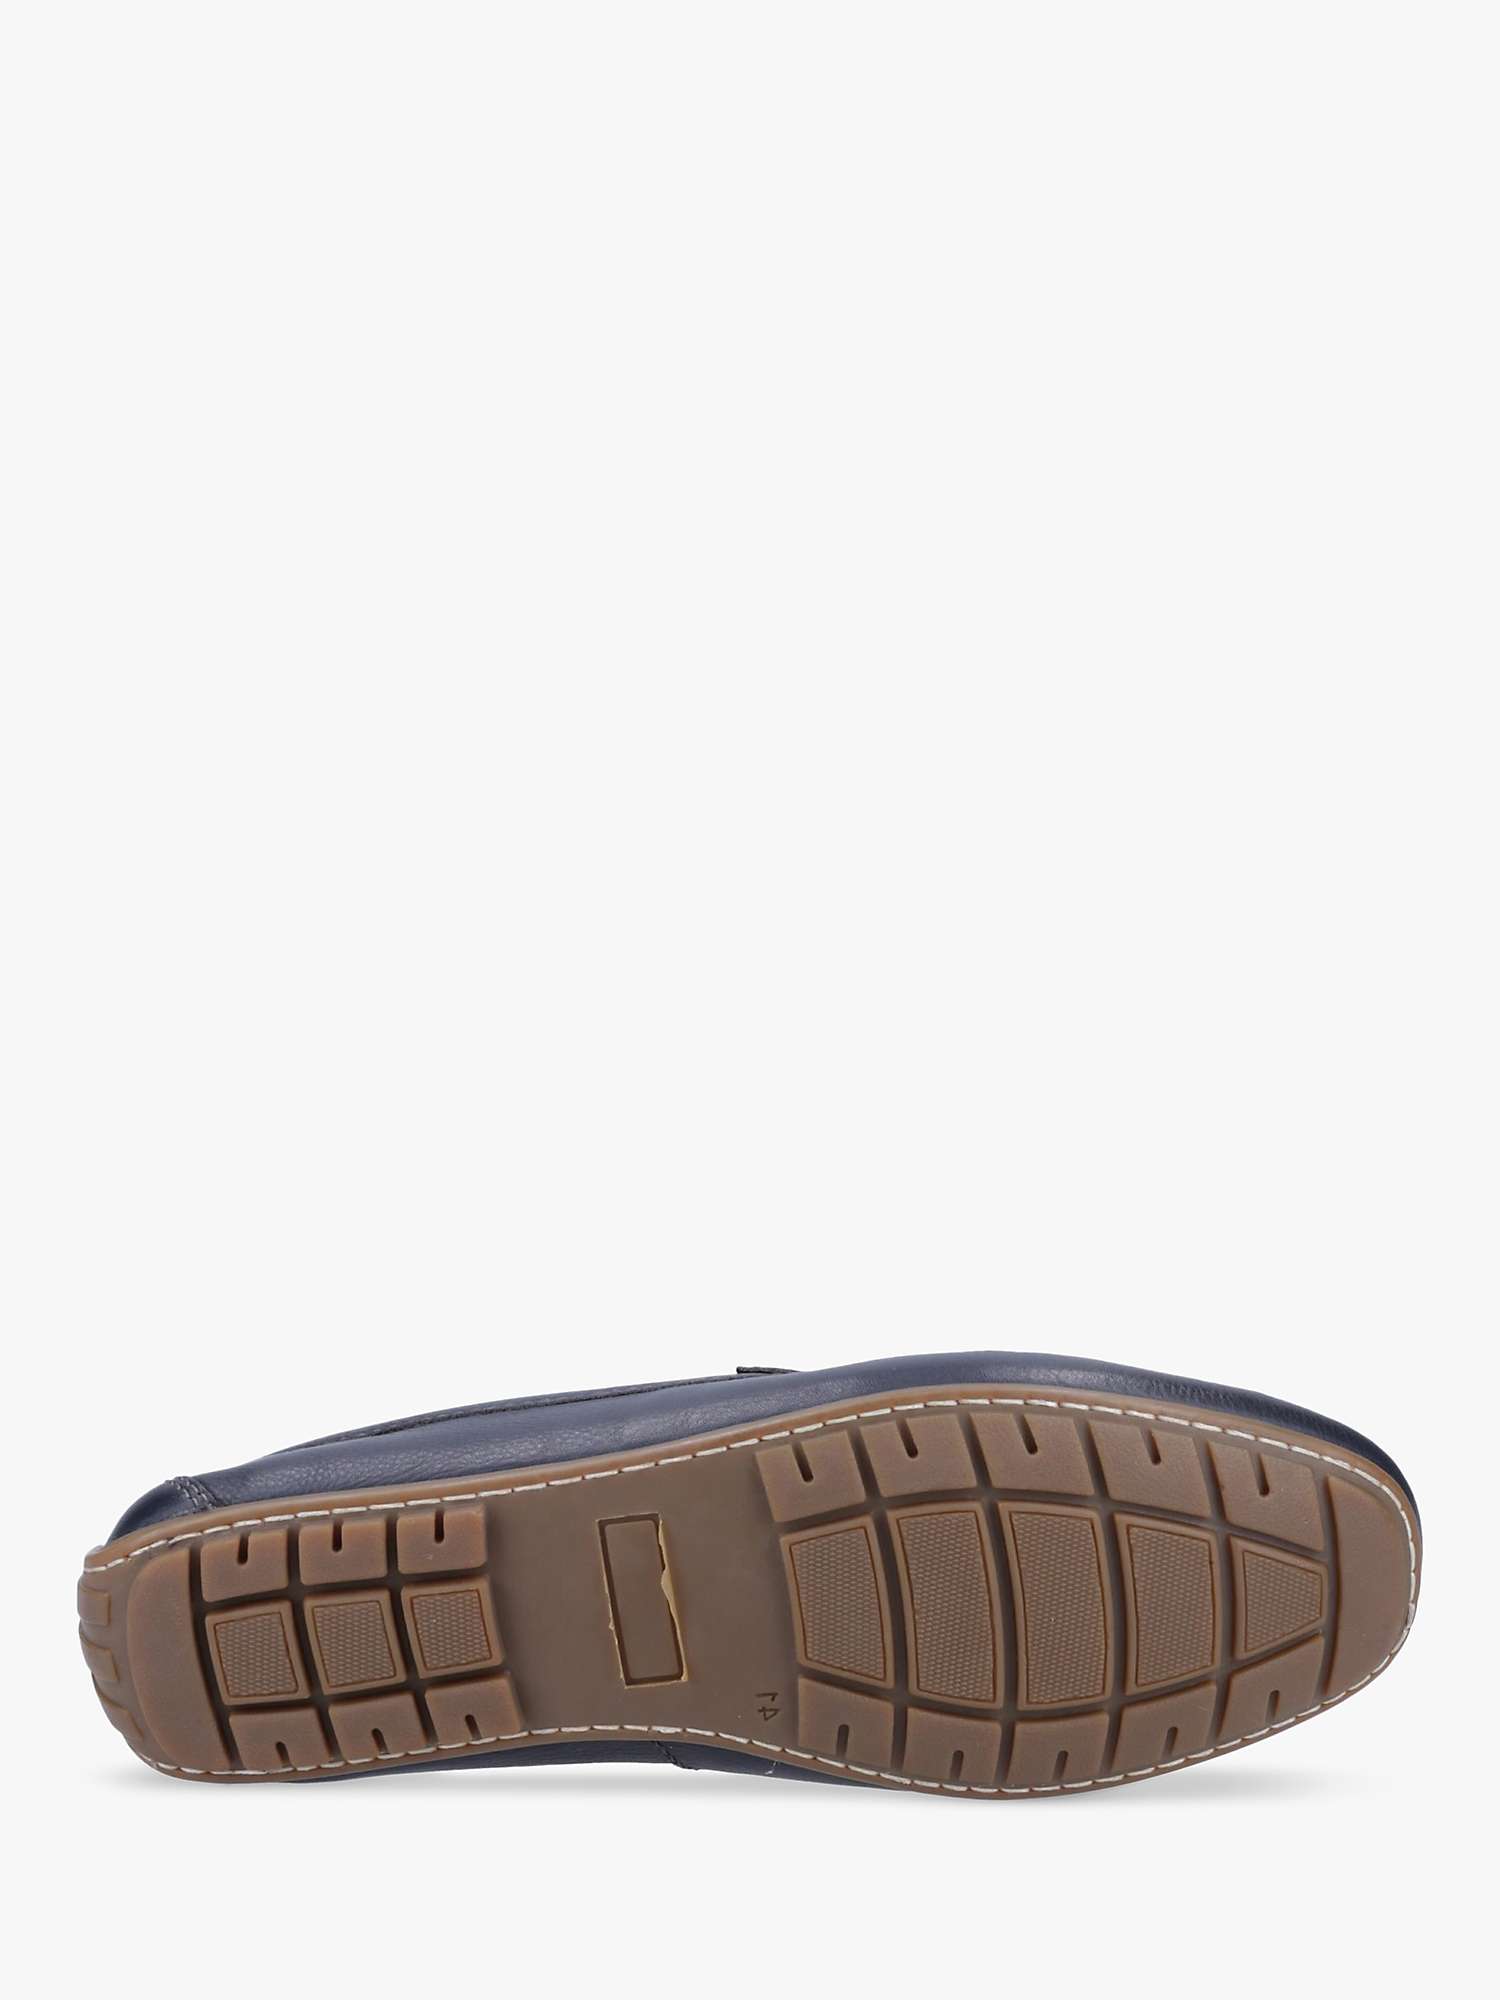 Buy Hush Puppies Ralph Leather Slip On Loafers Online at johnlewis.com